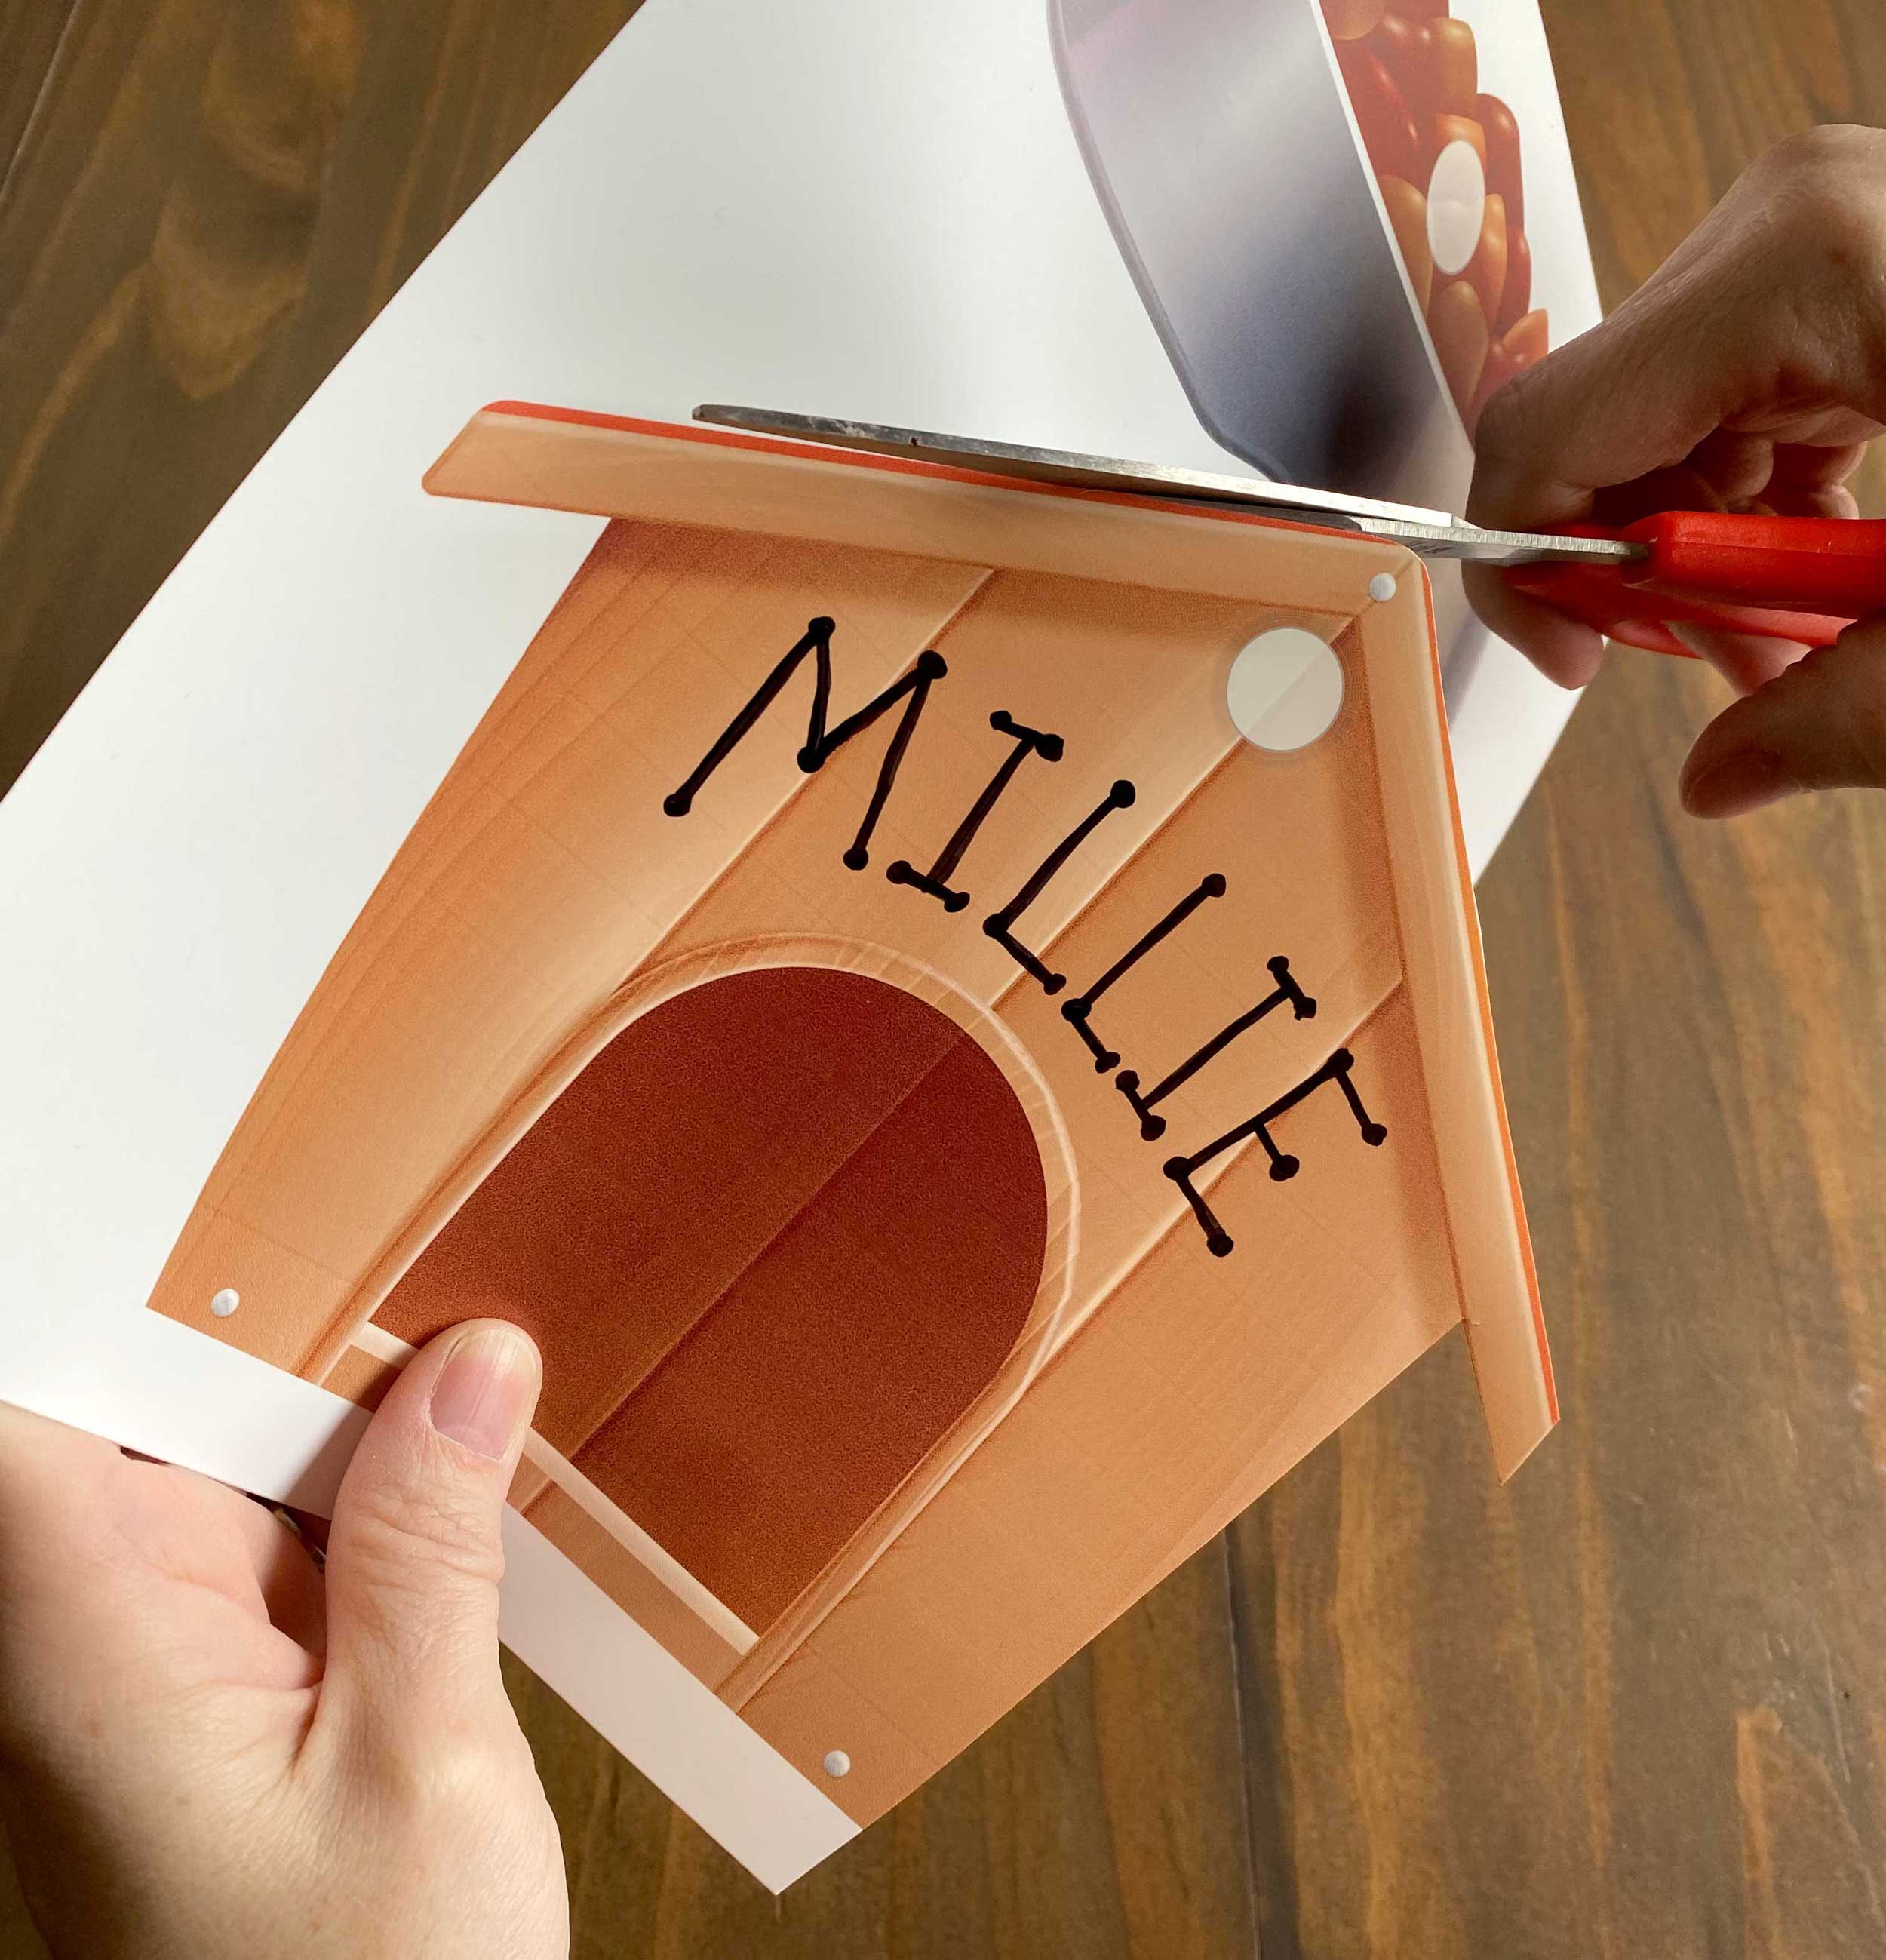 hand cutting out doghouse with the name Millie written on it